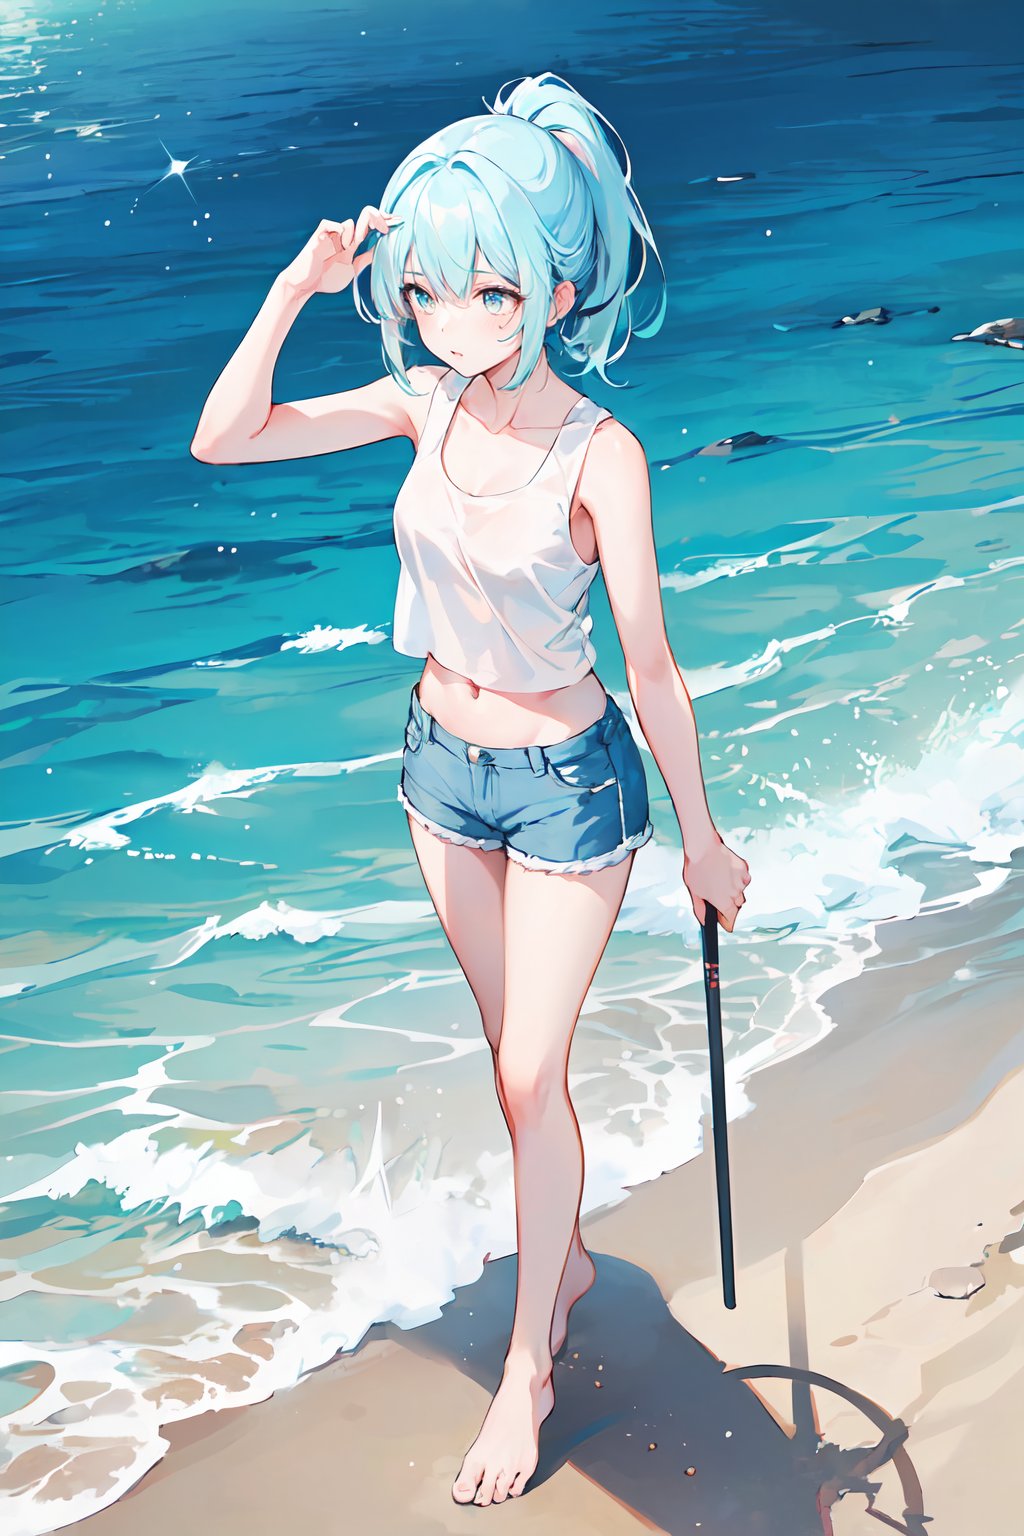  1 girl,light blue hair,ponytail,blue pupil,white tank top,white shorts,navel visible,ocean,crystal clear water,mysterious,bright,sparkling,full body,slender,barefoot,stand,adjusting hair,